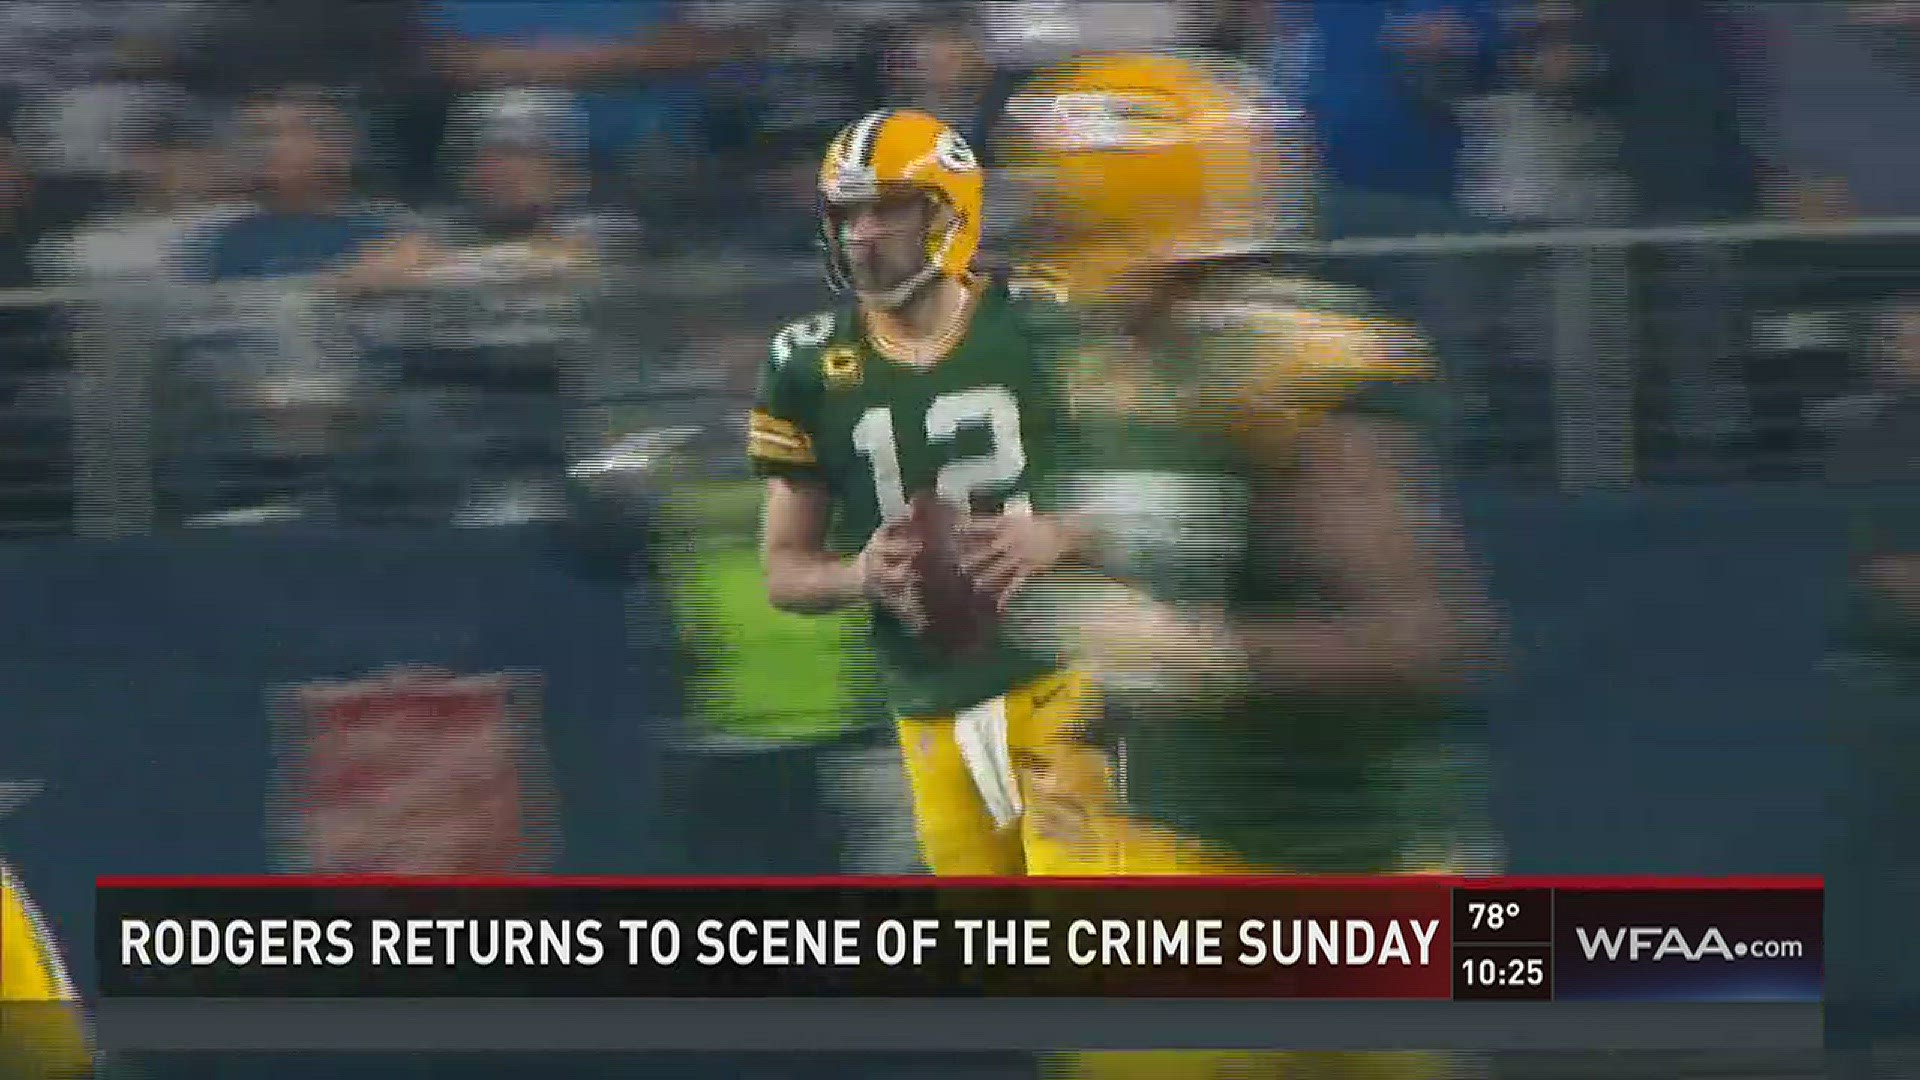 A Law & Order take on Aaron Rodgers' return to the 'crime scene' that is AT&T Stadium